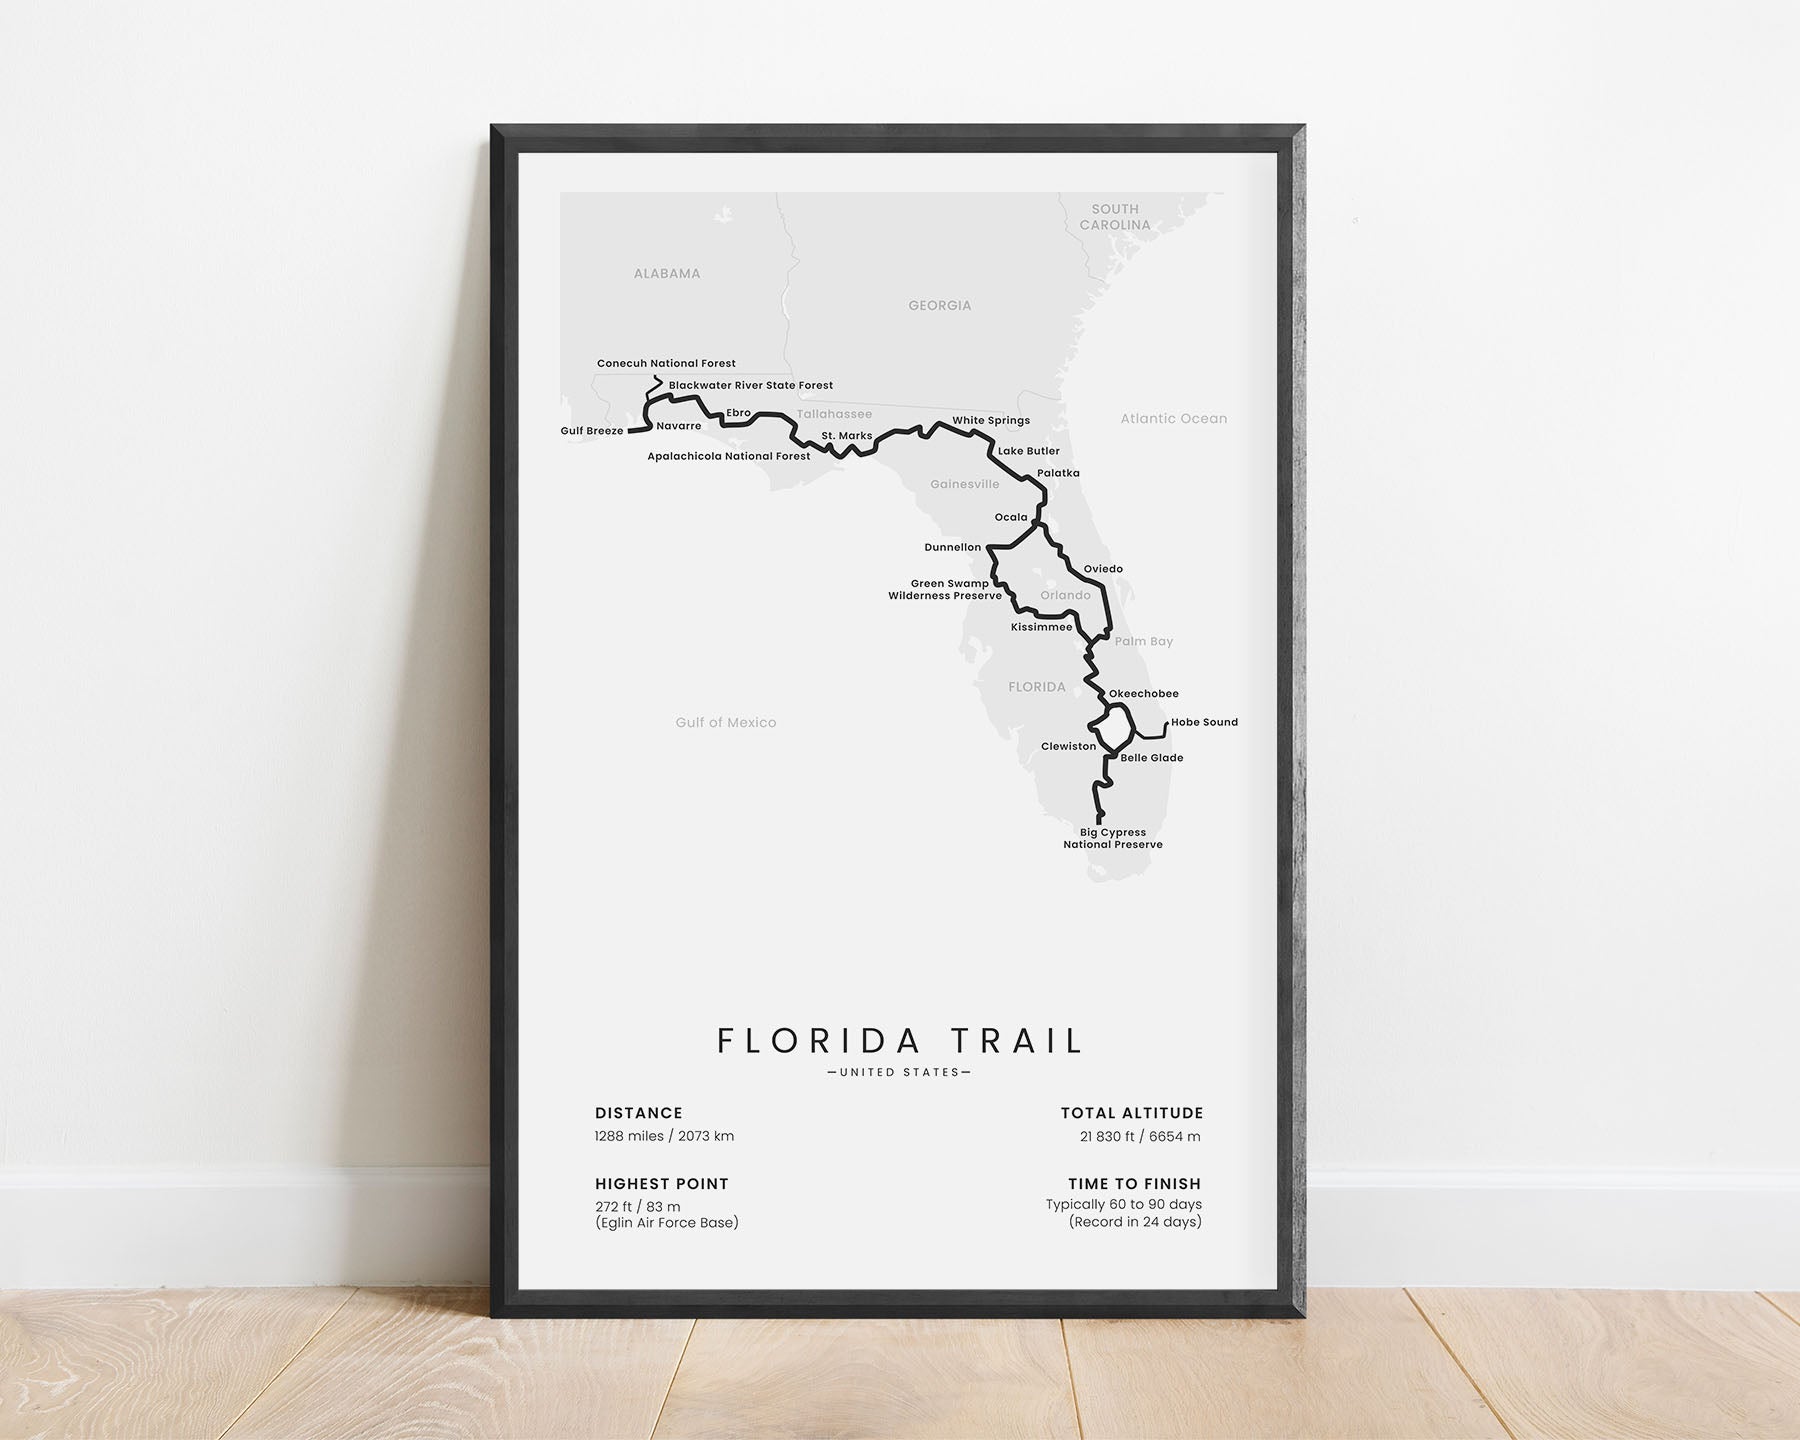 Florida Trail trek poster with white background (Big Cypress National Preserve to Fort Pickens)